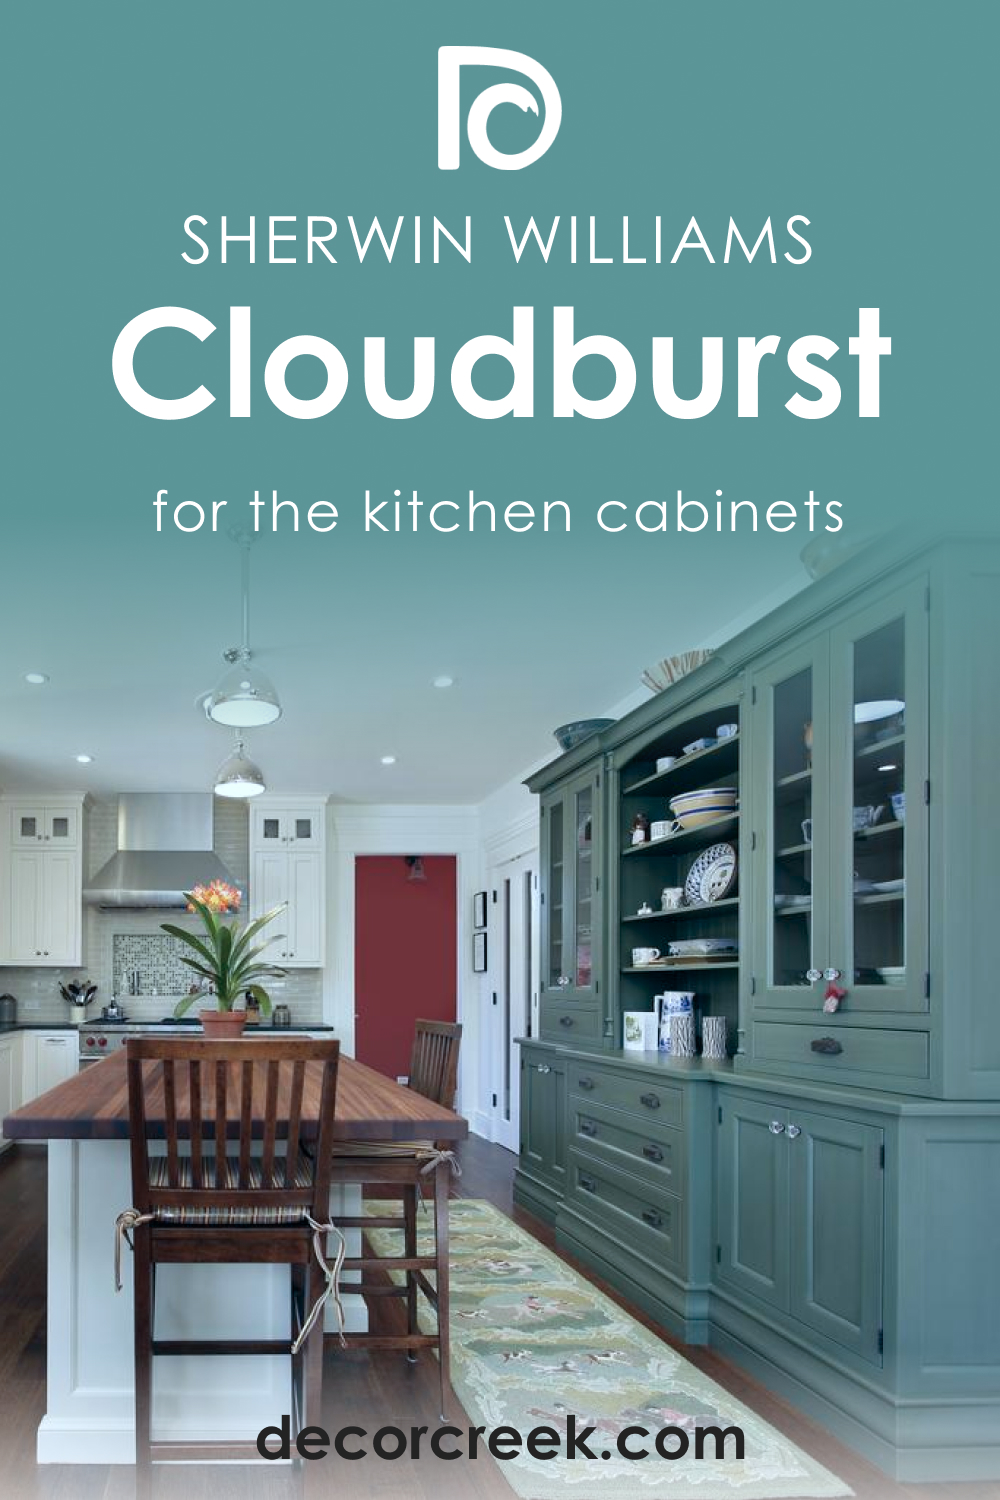 How to Use SW 6487 Cloudburst for the Kitchen Cabinets?